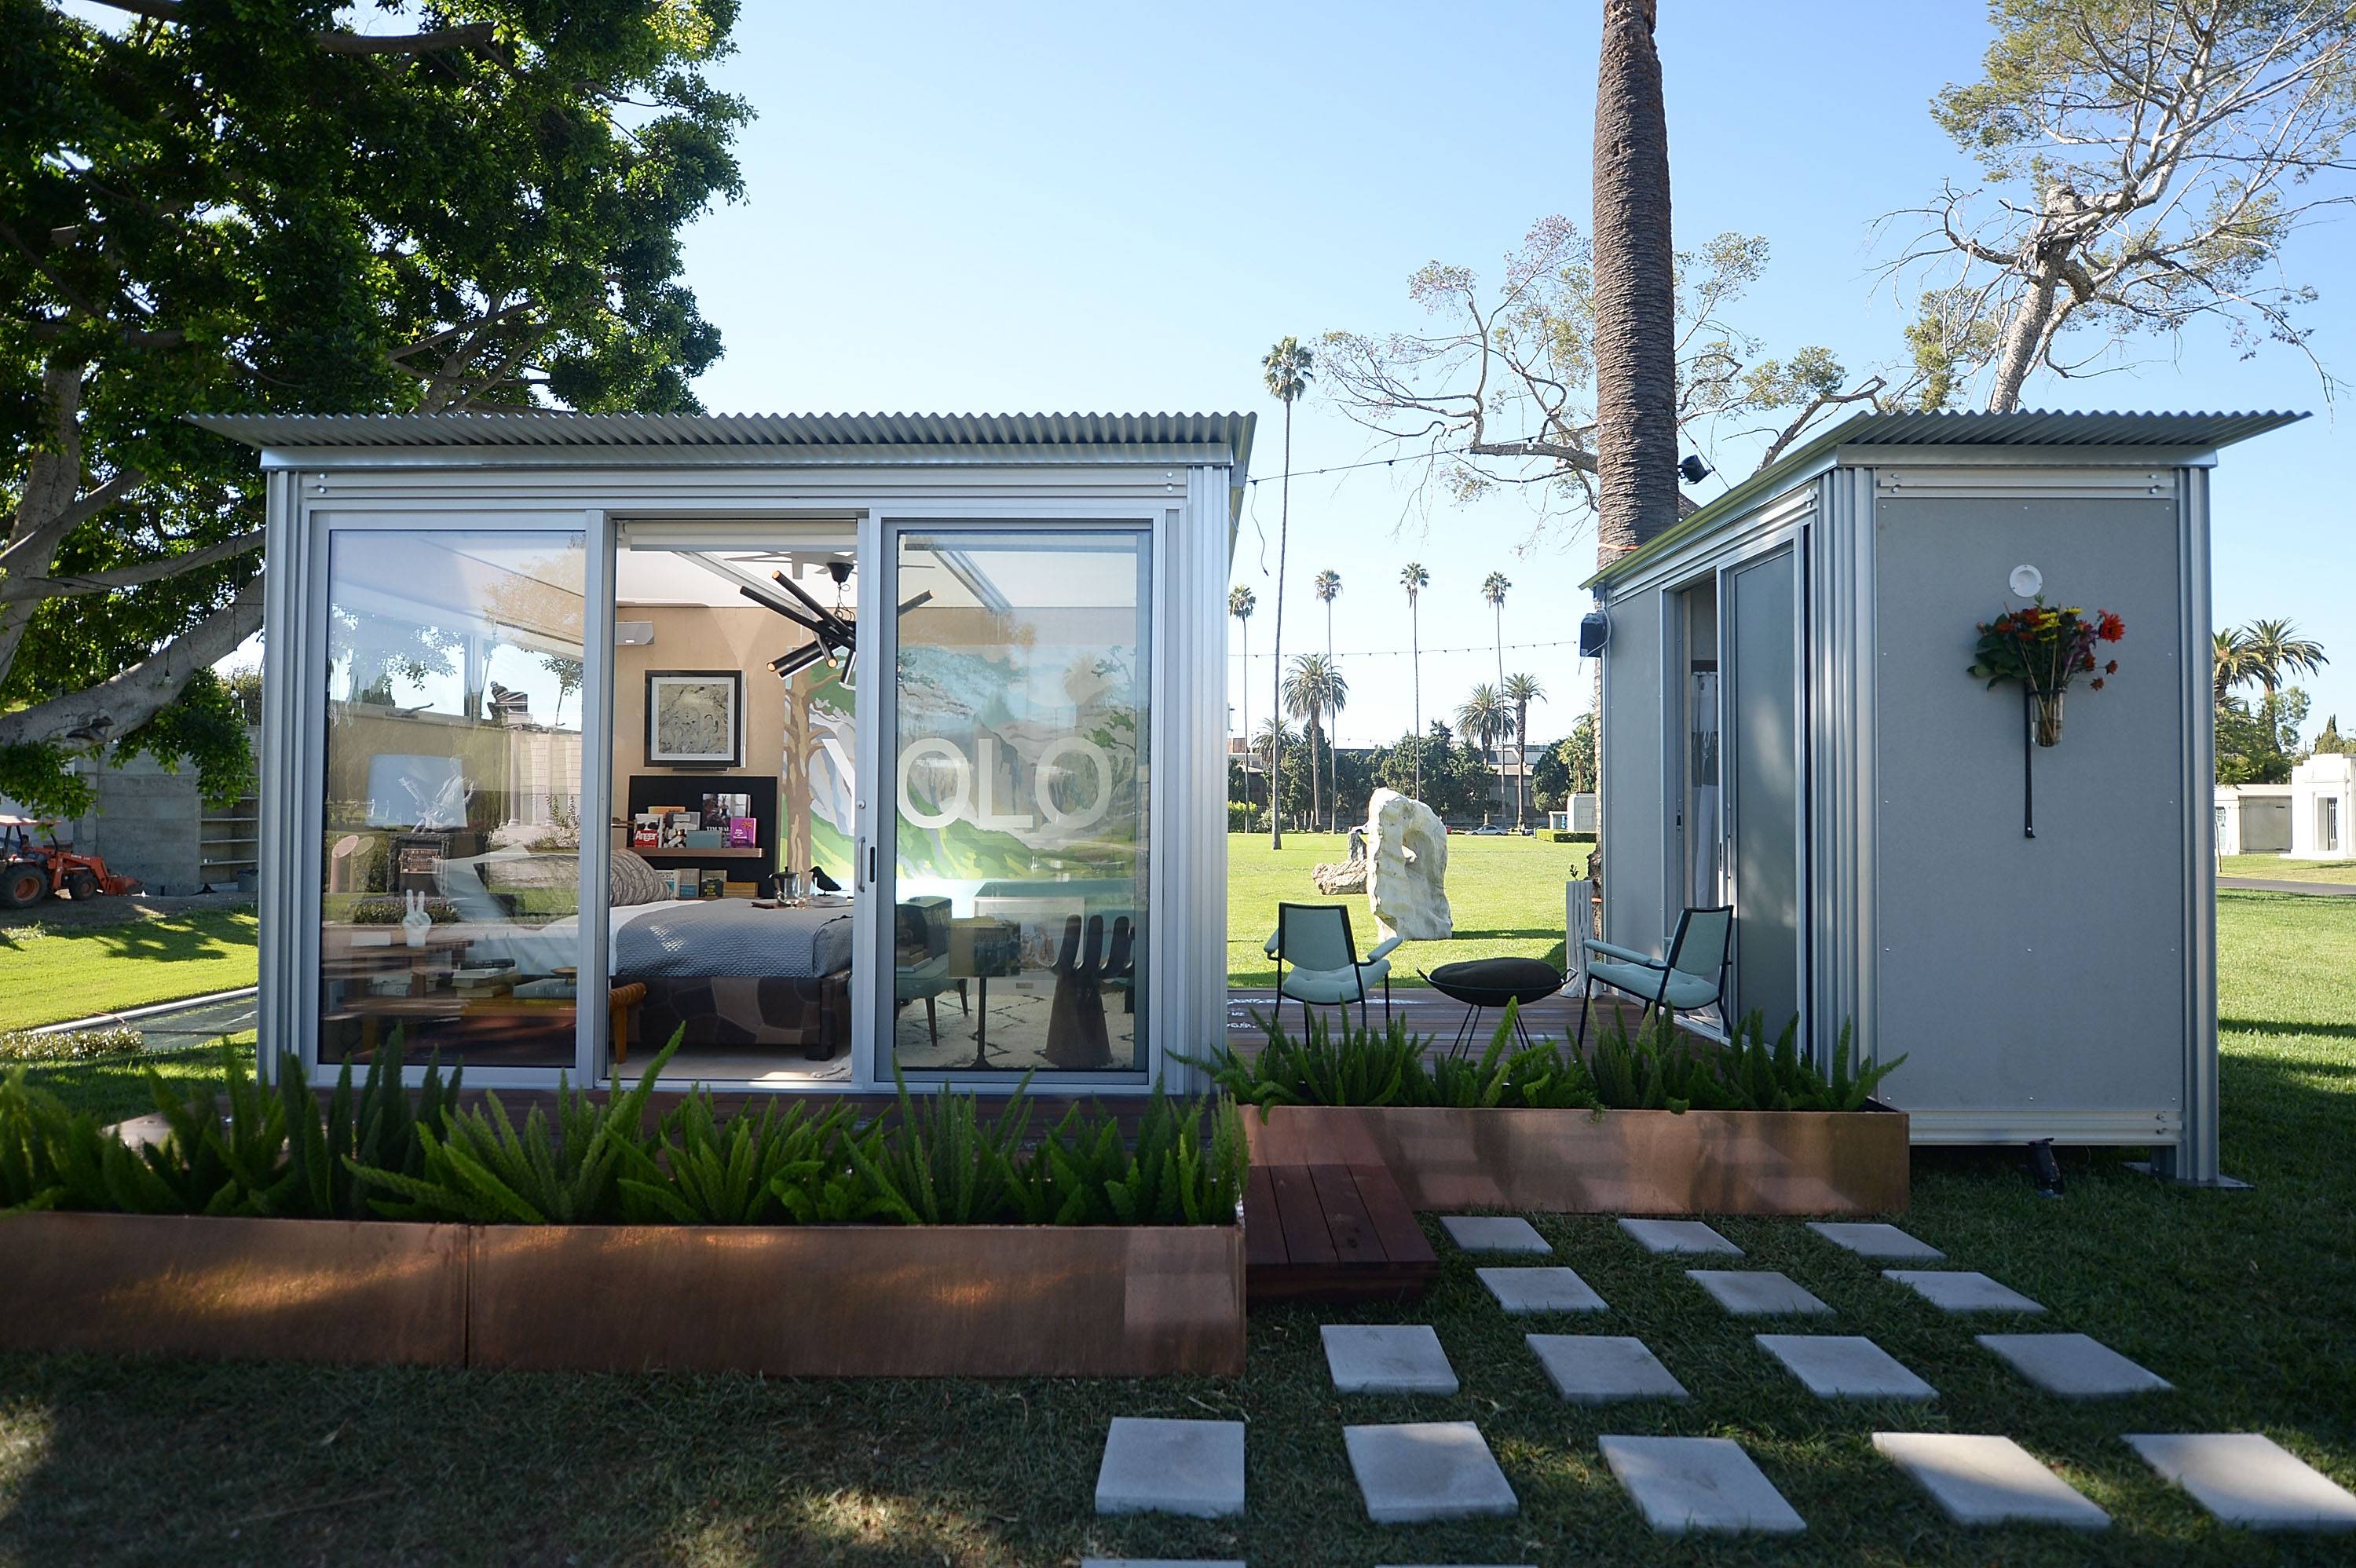 Actor James Franco Designs his Hollywood Forever Cemetery Pop-Up at Airbnb's Hello LA Design Lab